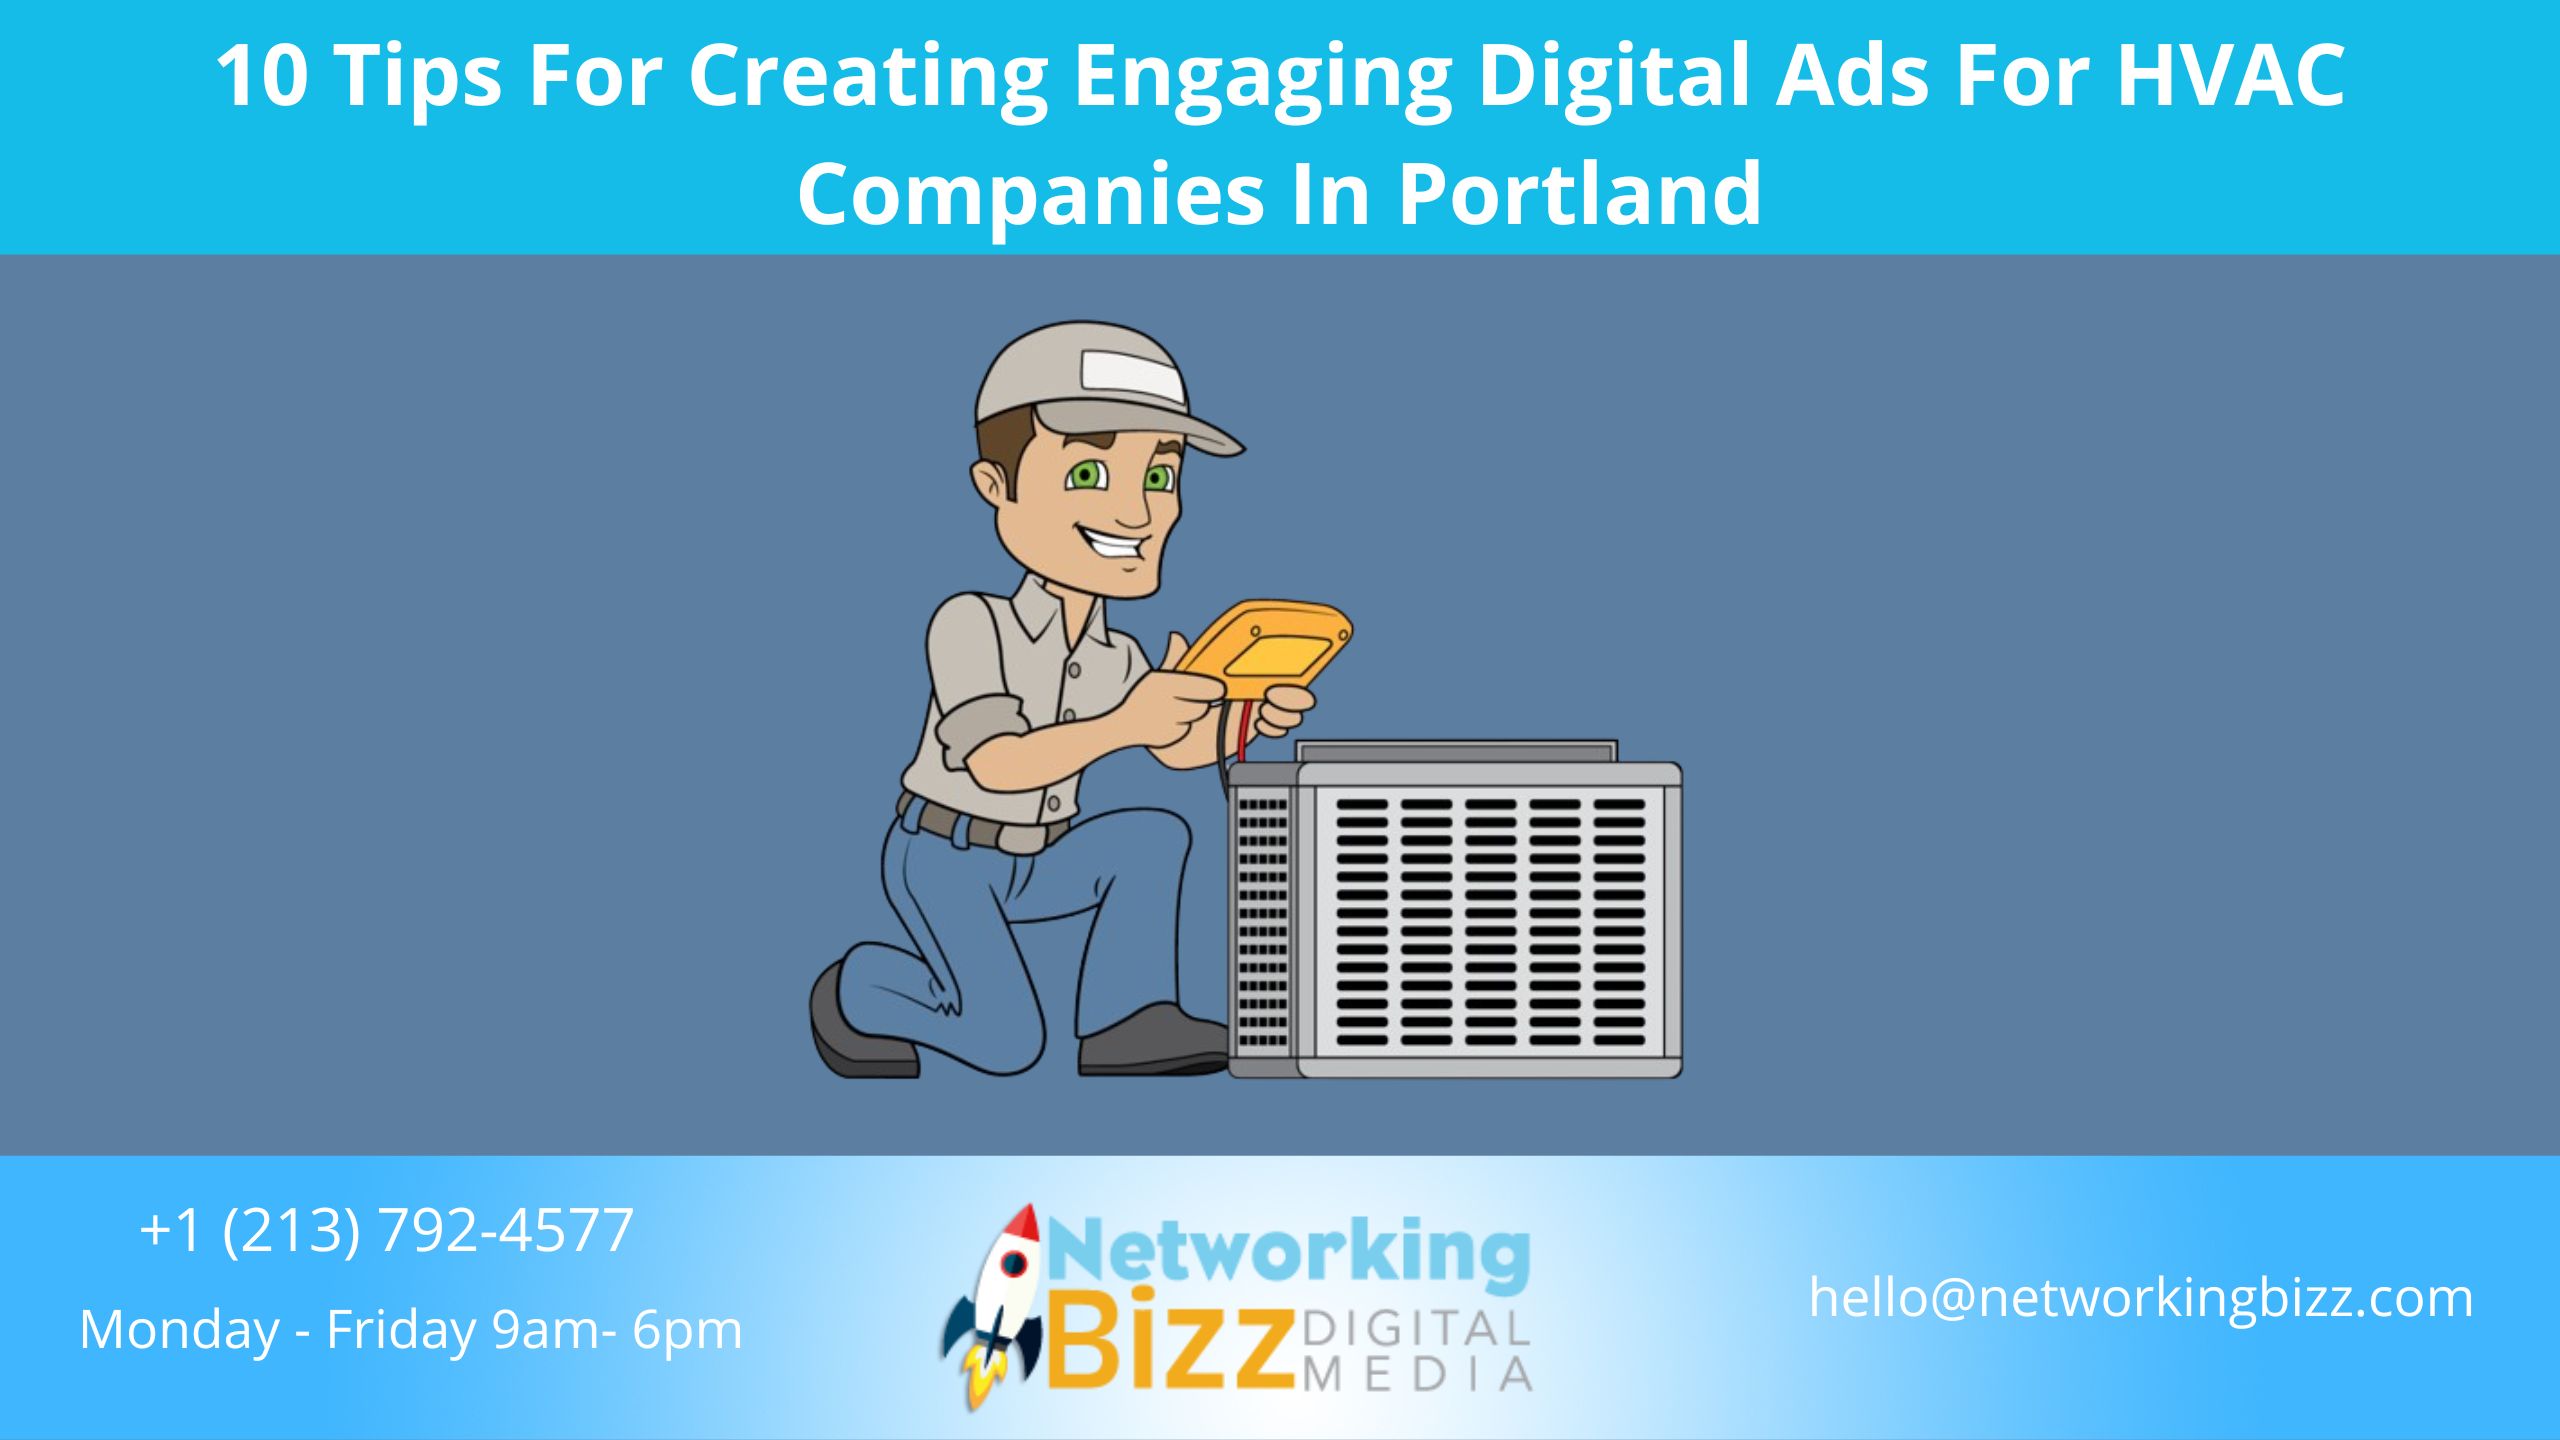 10 Tips For Creating Engaging Digital Ads For HVAC Companies In Portland